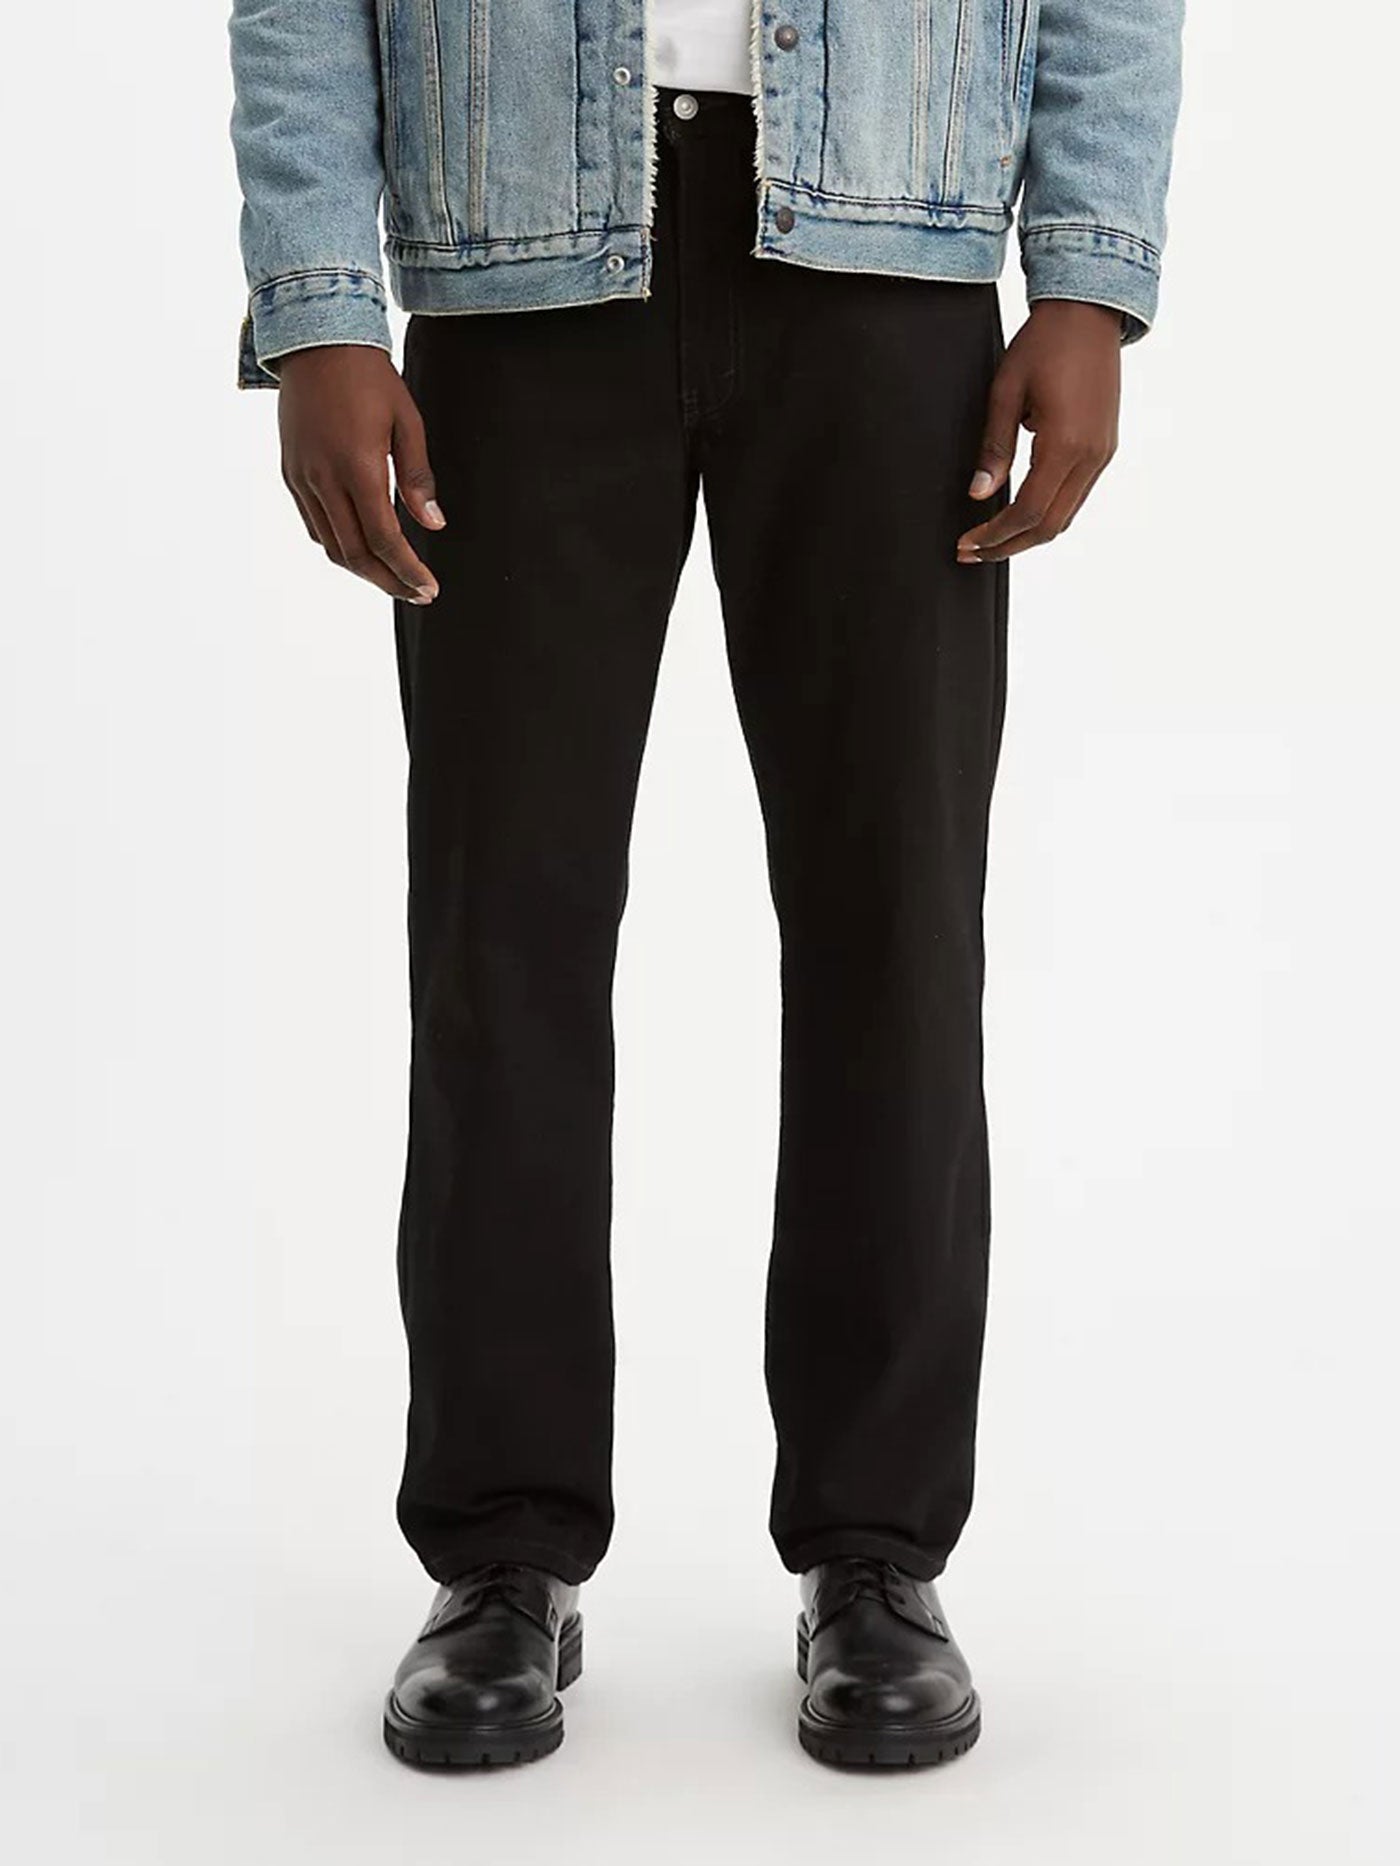 Levis 550 Relaxed Black Jeans